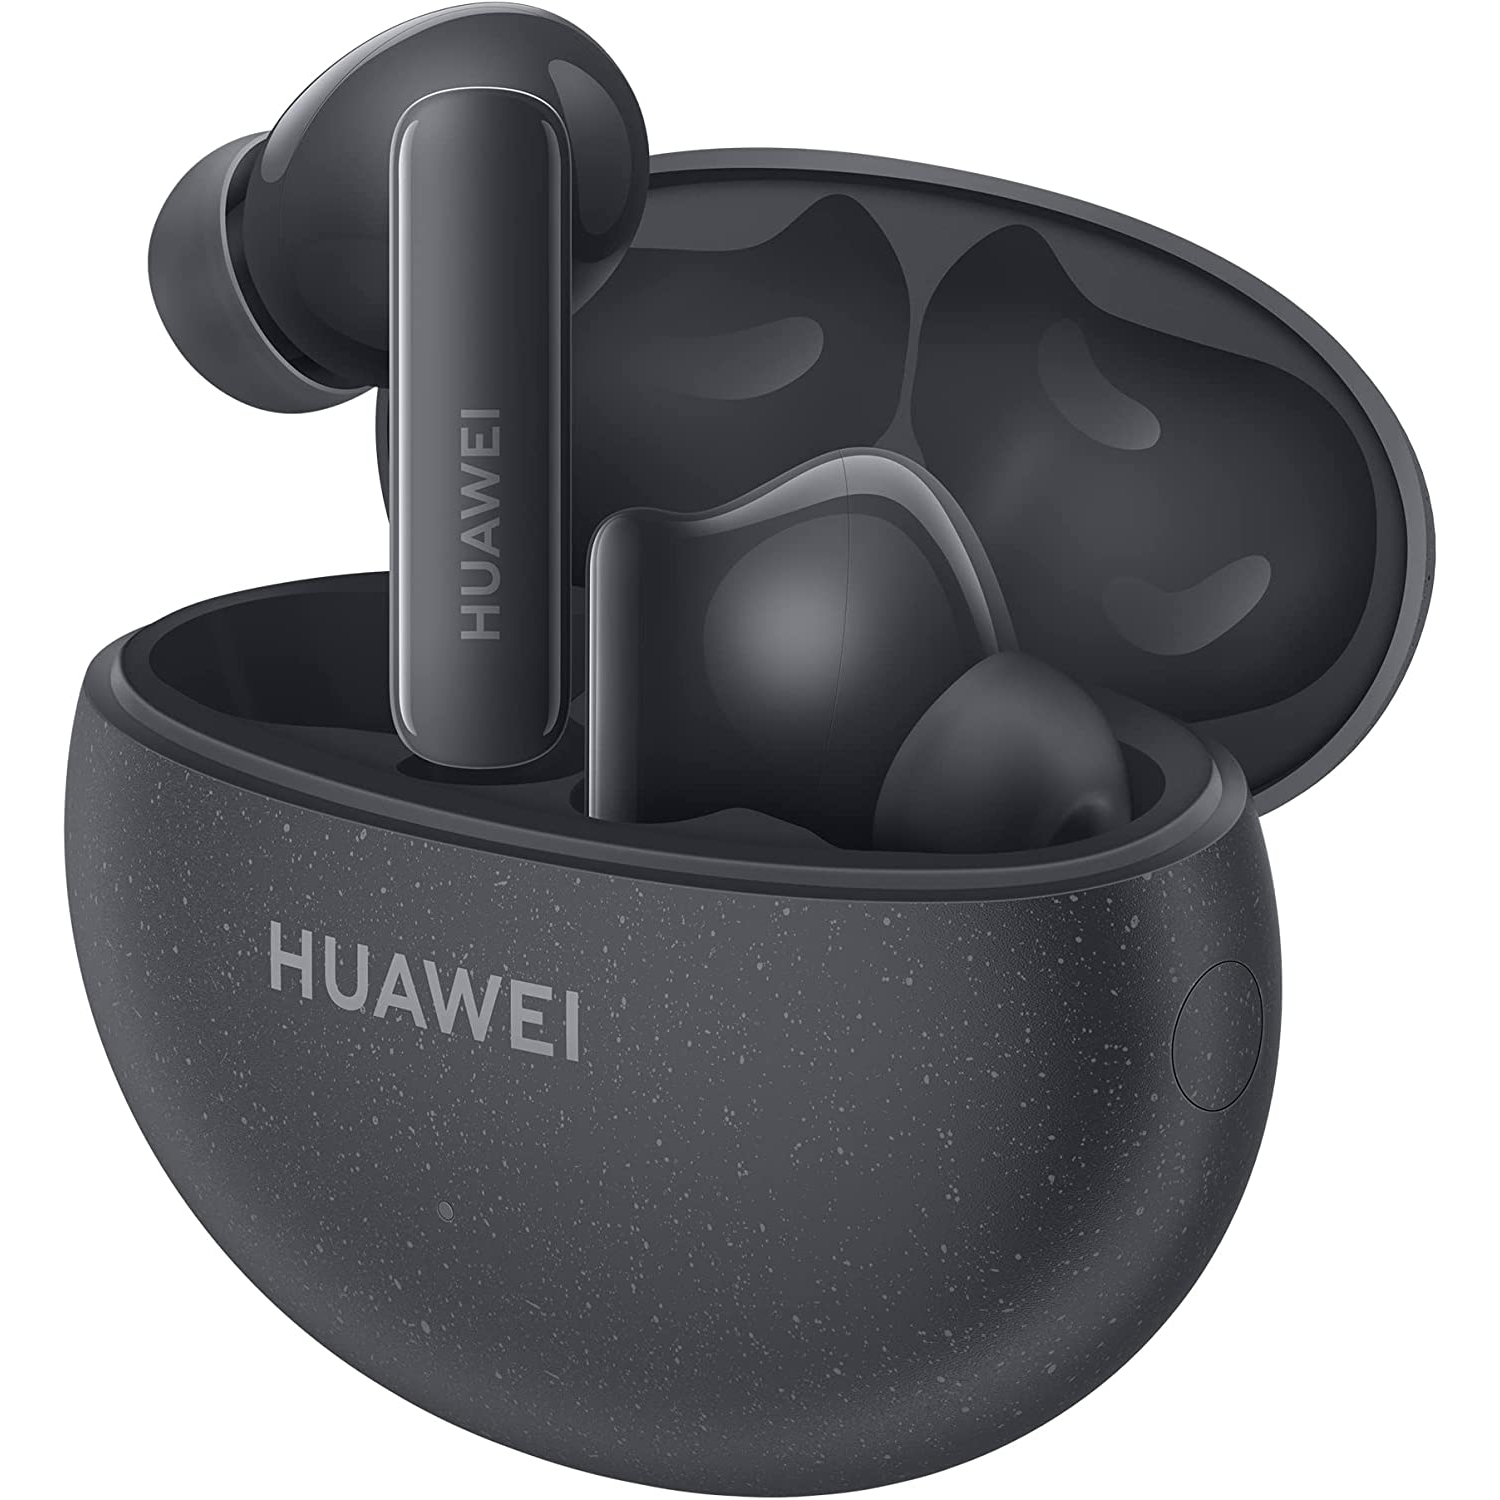 HUAWEI FreeBuds 5i Wireless Earphone - TWS Bluetooth Earbuds, Hi-Res sound, multi-mode noise cancellation, 28 hr battery life, Dual device connection, Nebula Black